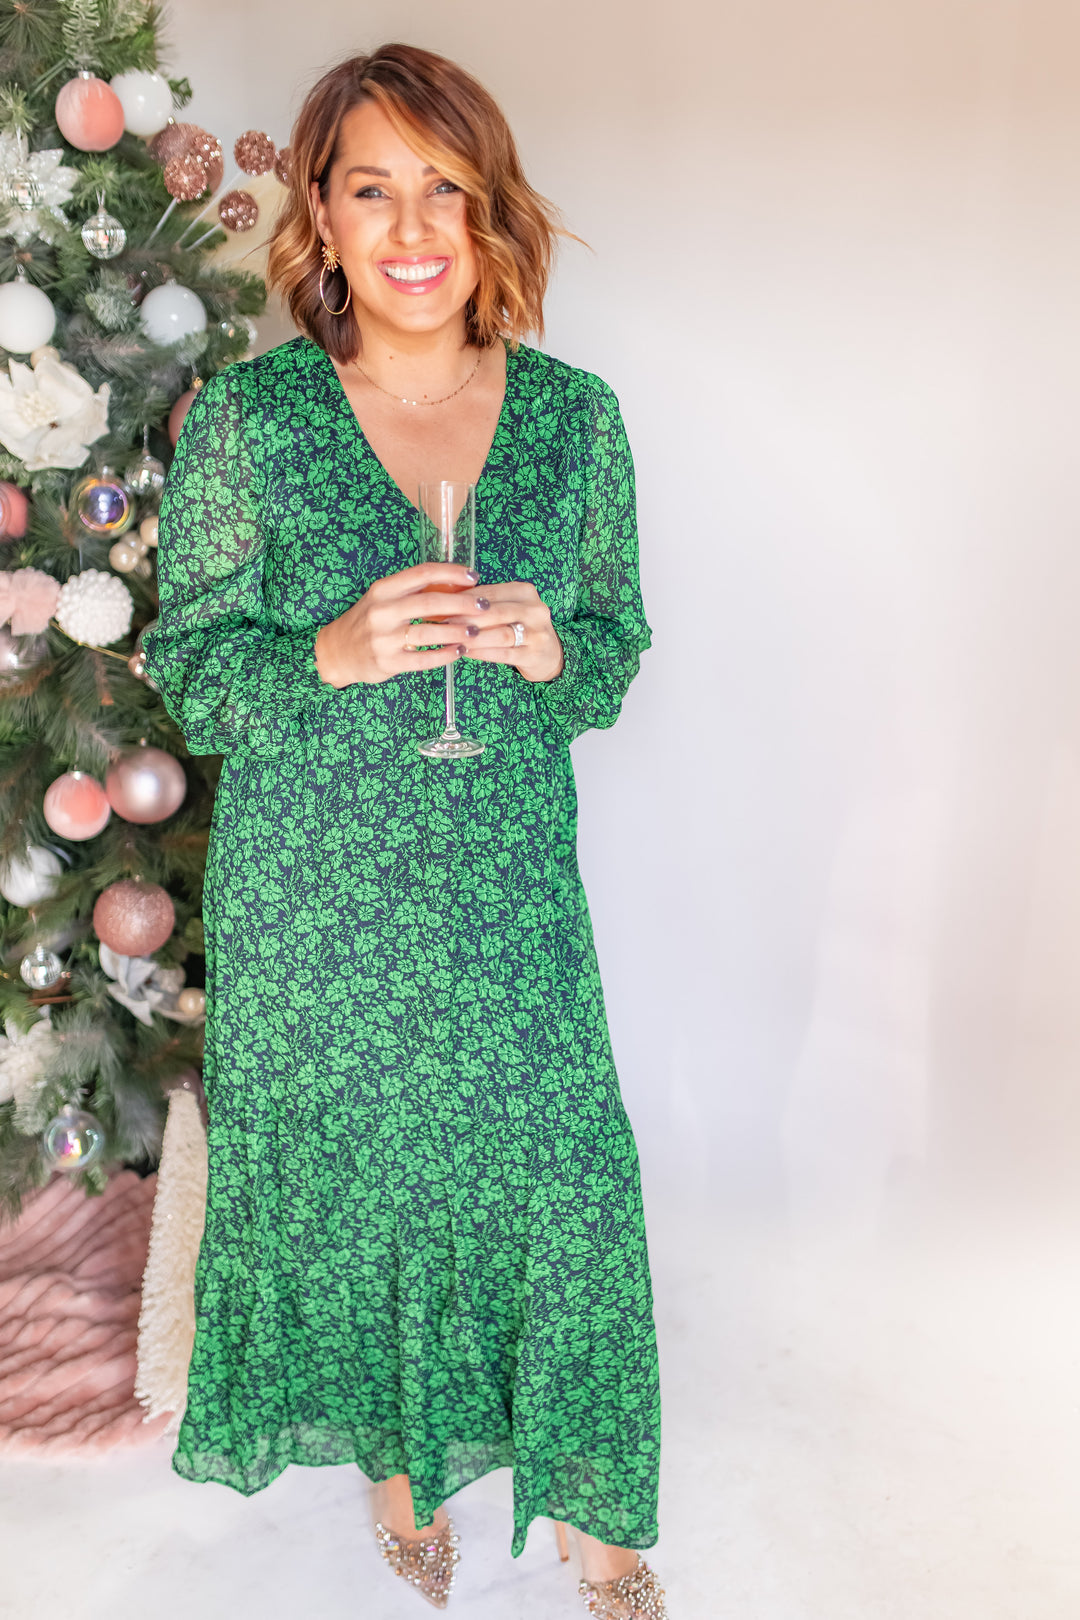 The Love Me More Floral Maxi Dress